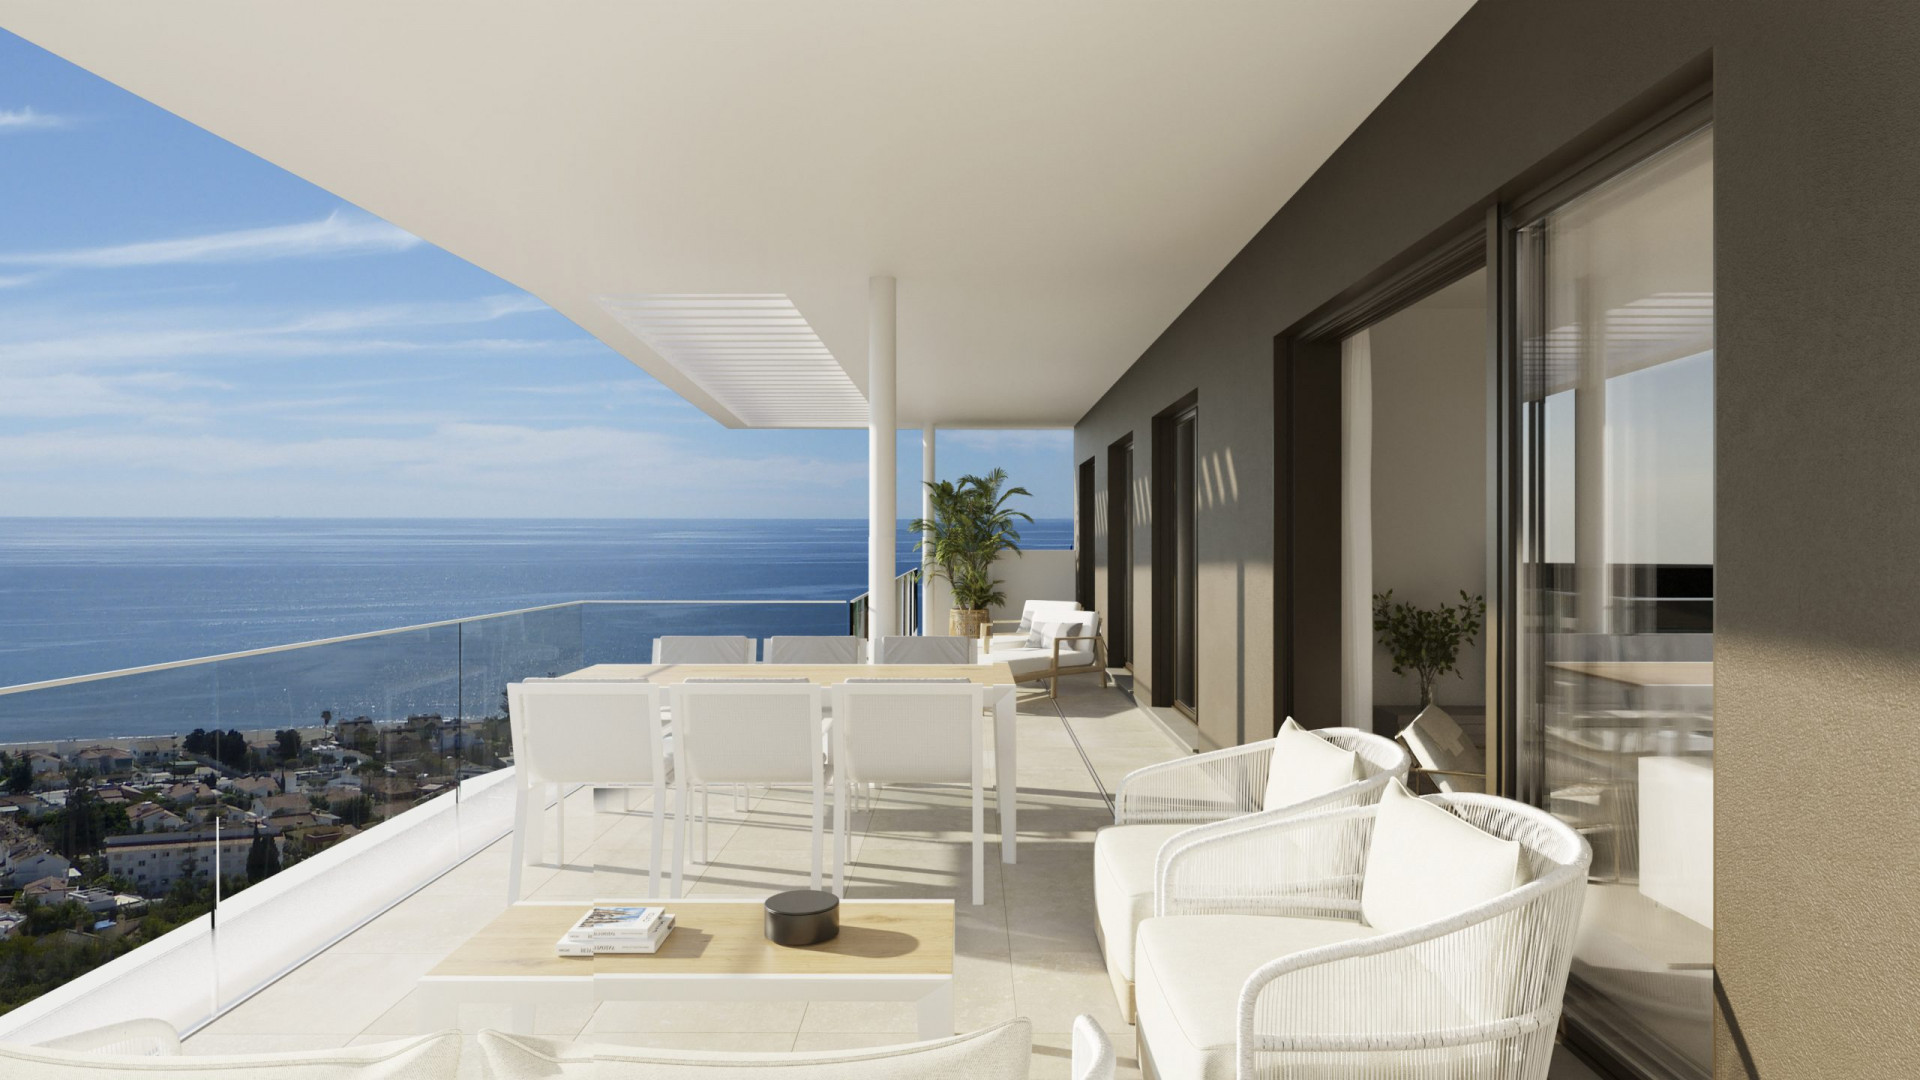 Idilia Mare: Development of 34 modern flats and penthouses with sea views in Rincón de la Victoria. | Image 14